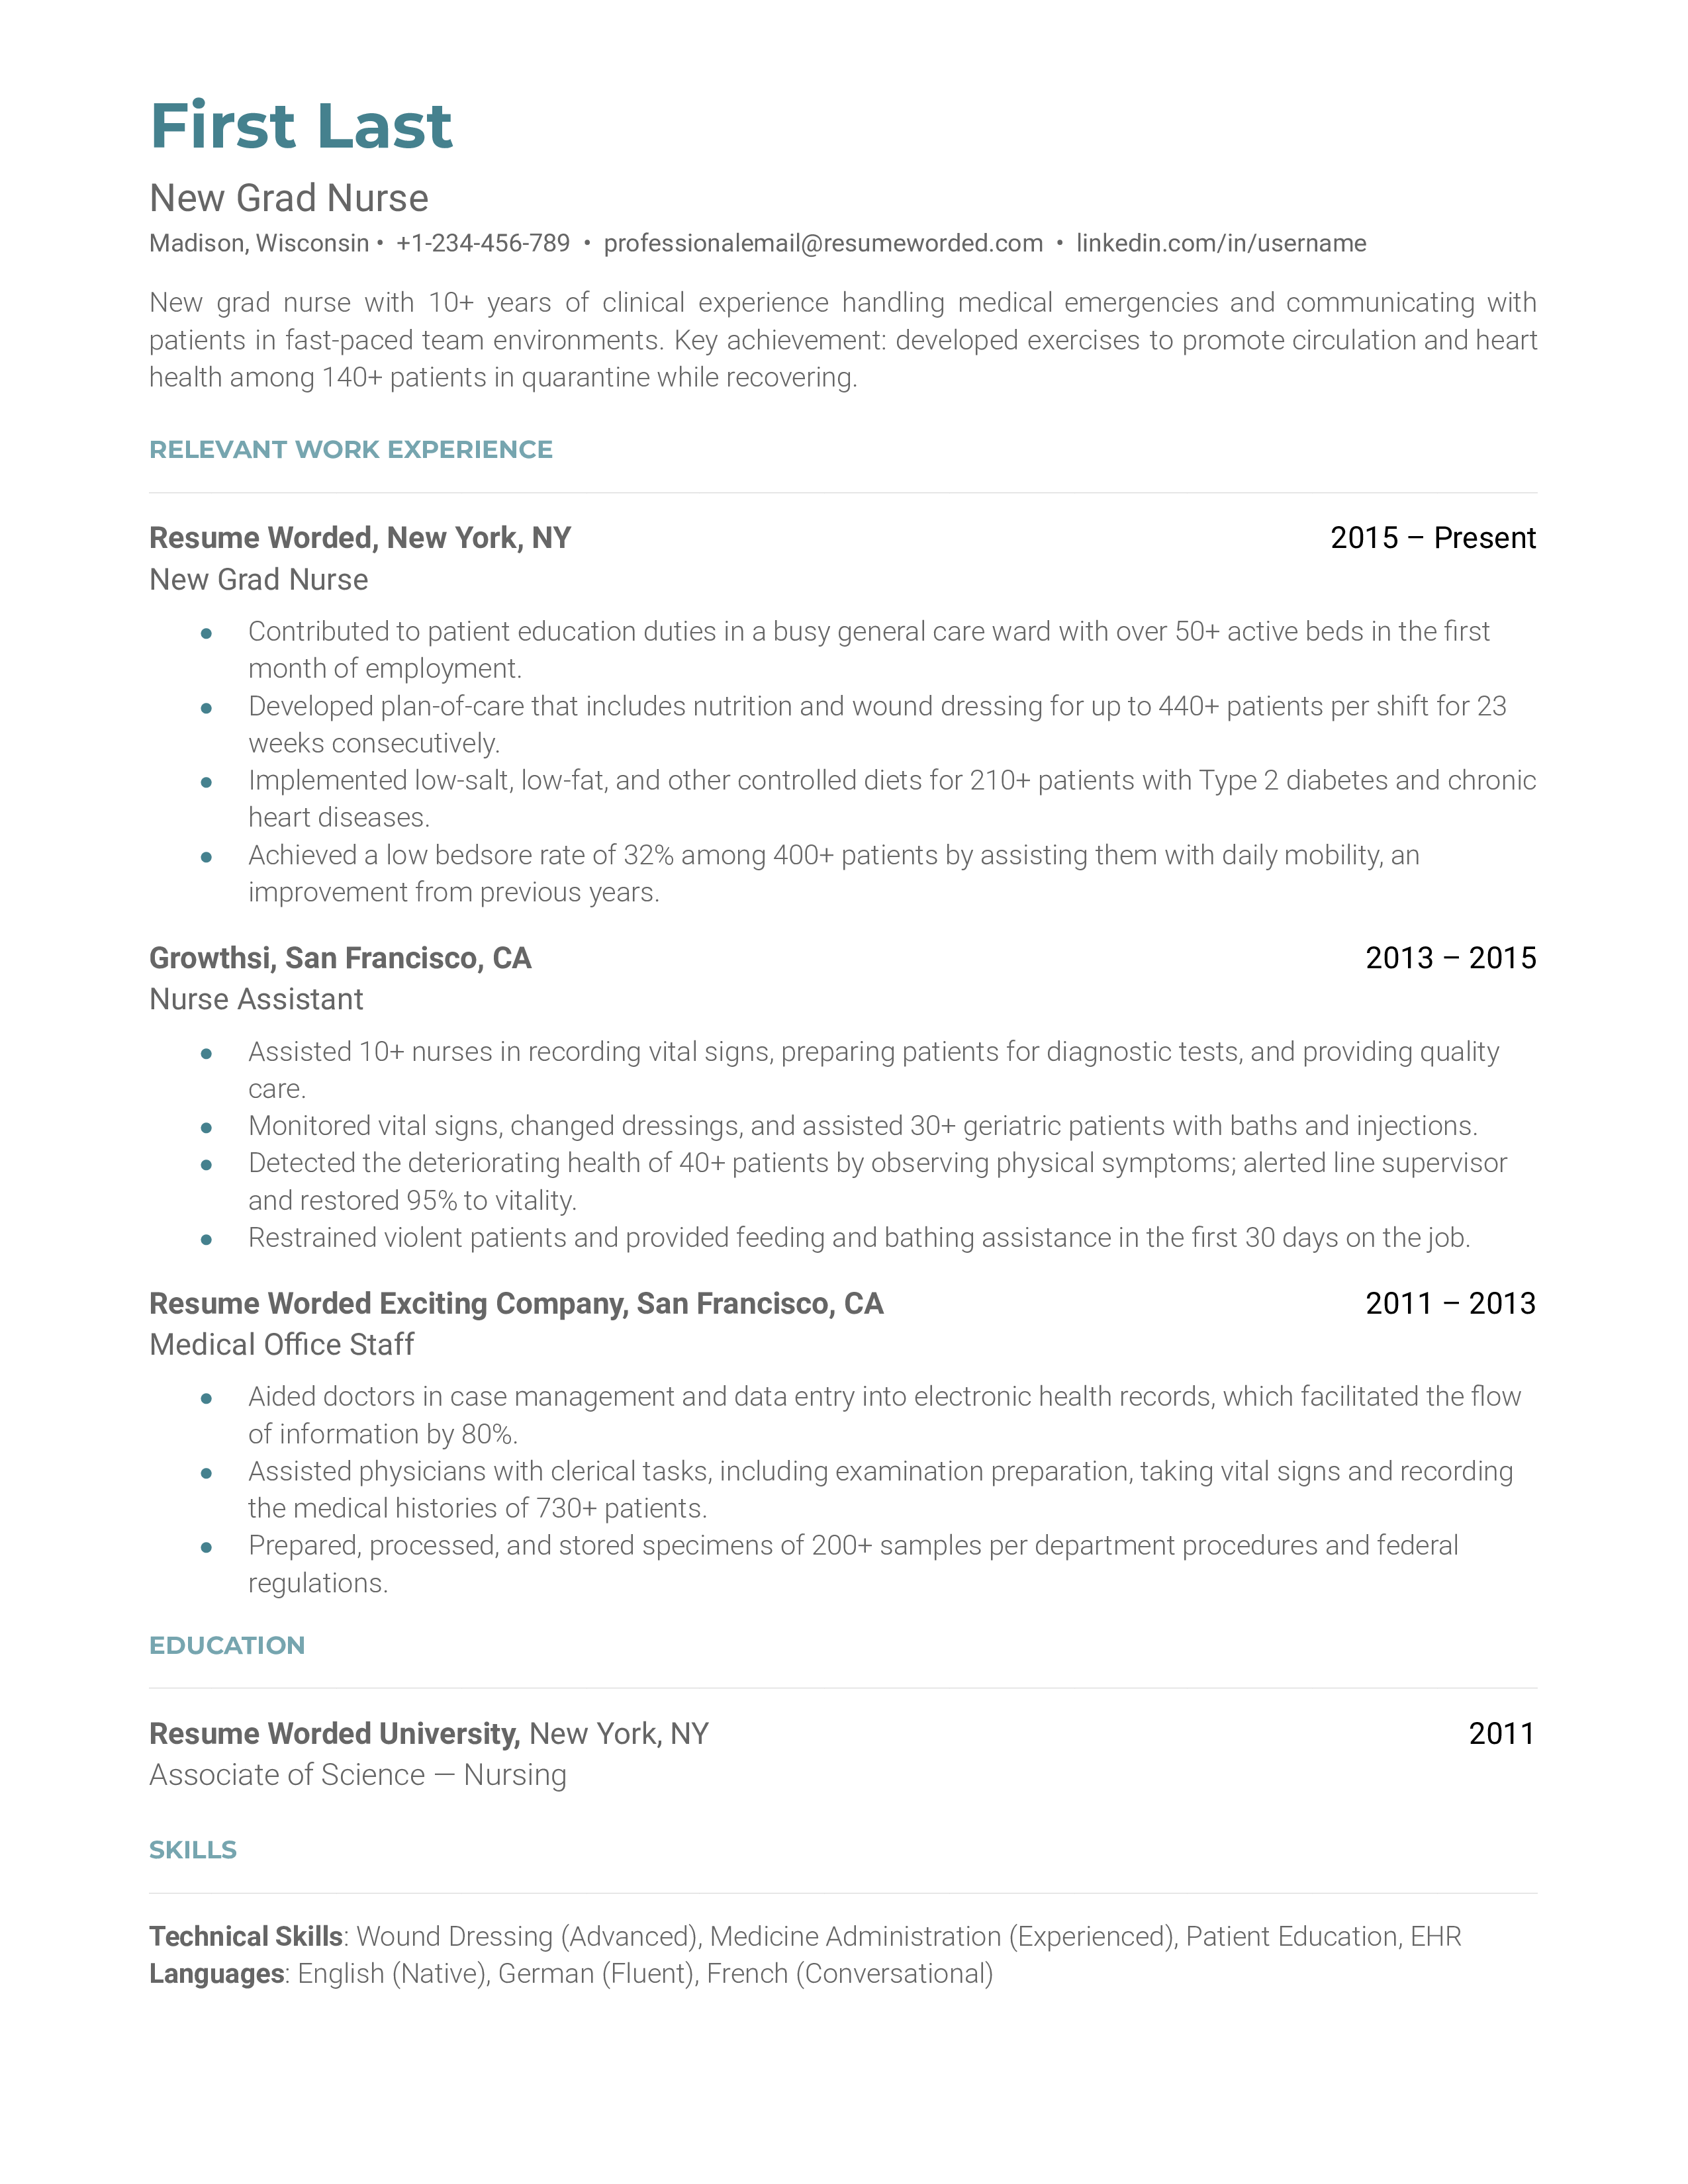 A CV for a New Grad Nurse showcasing clinical experience and soft skills.